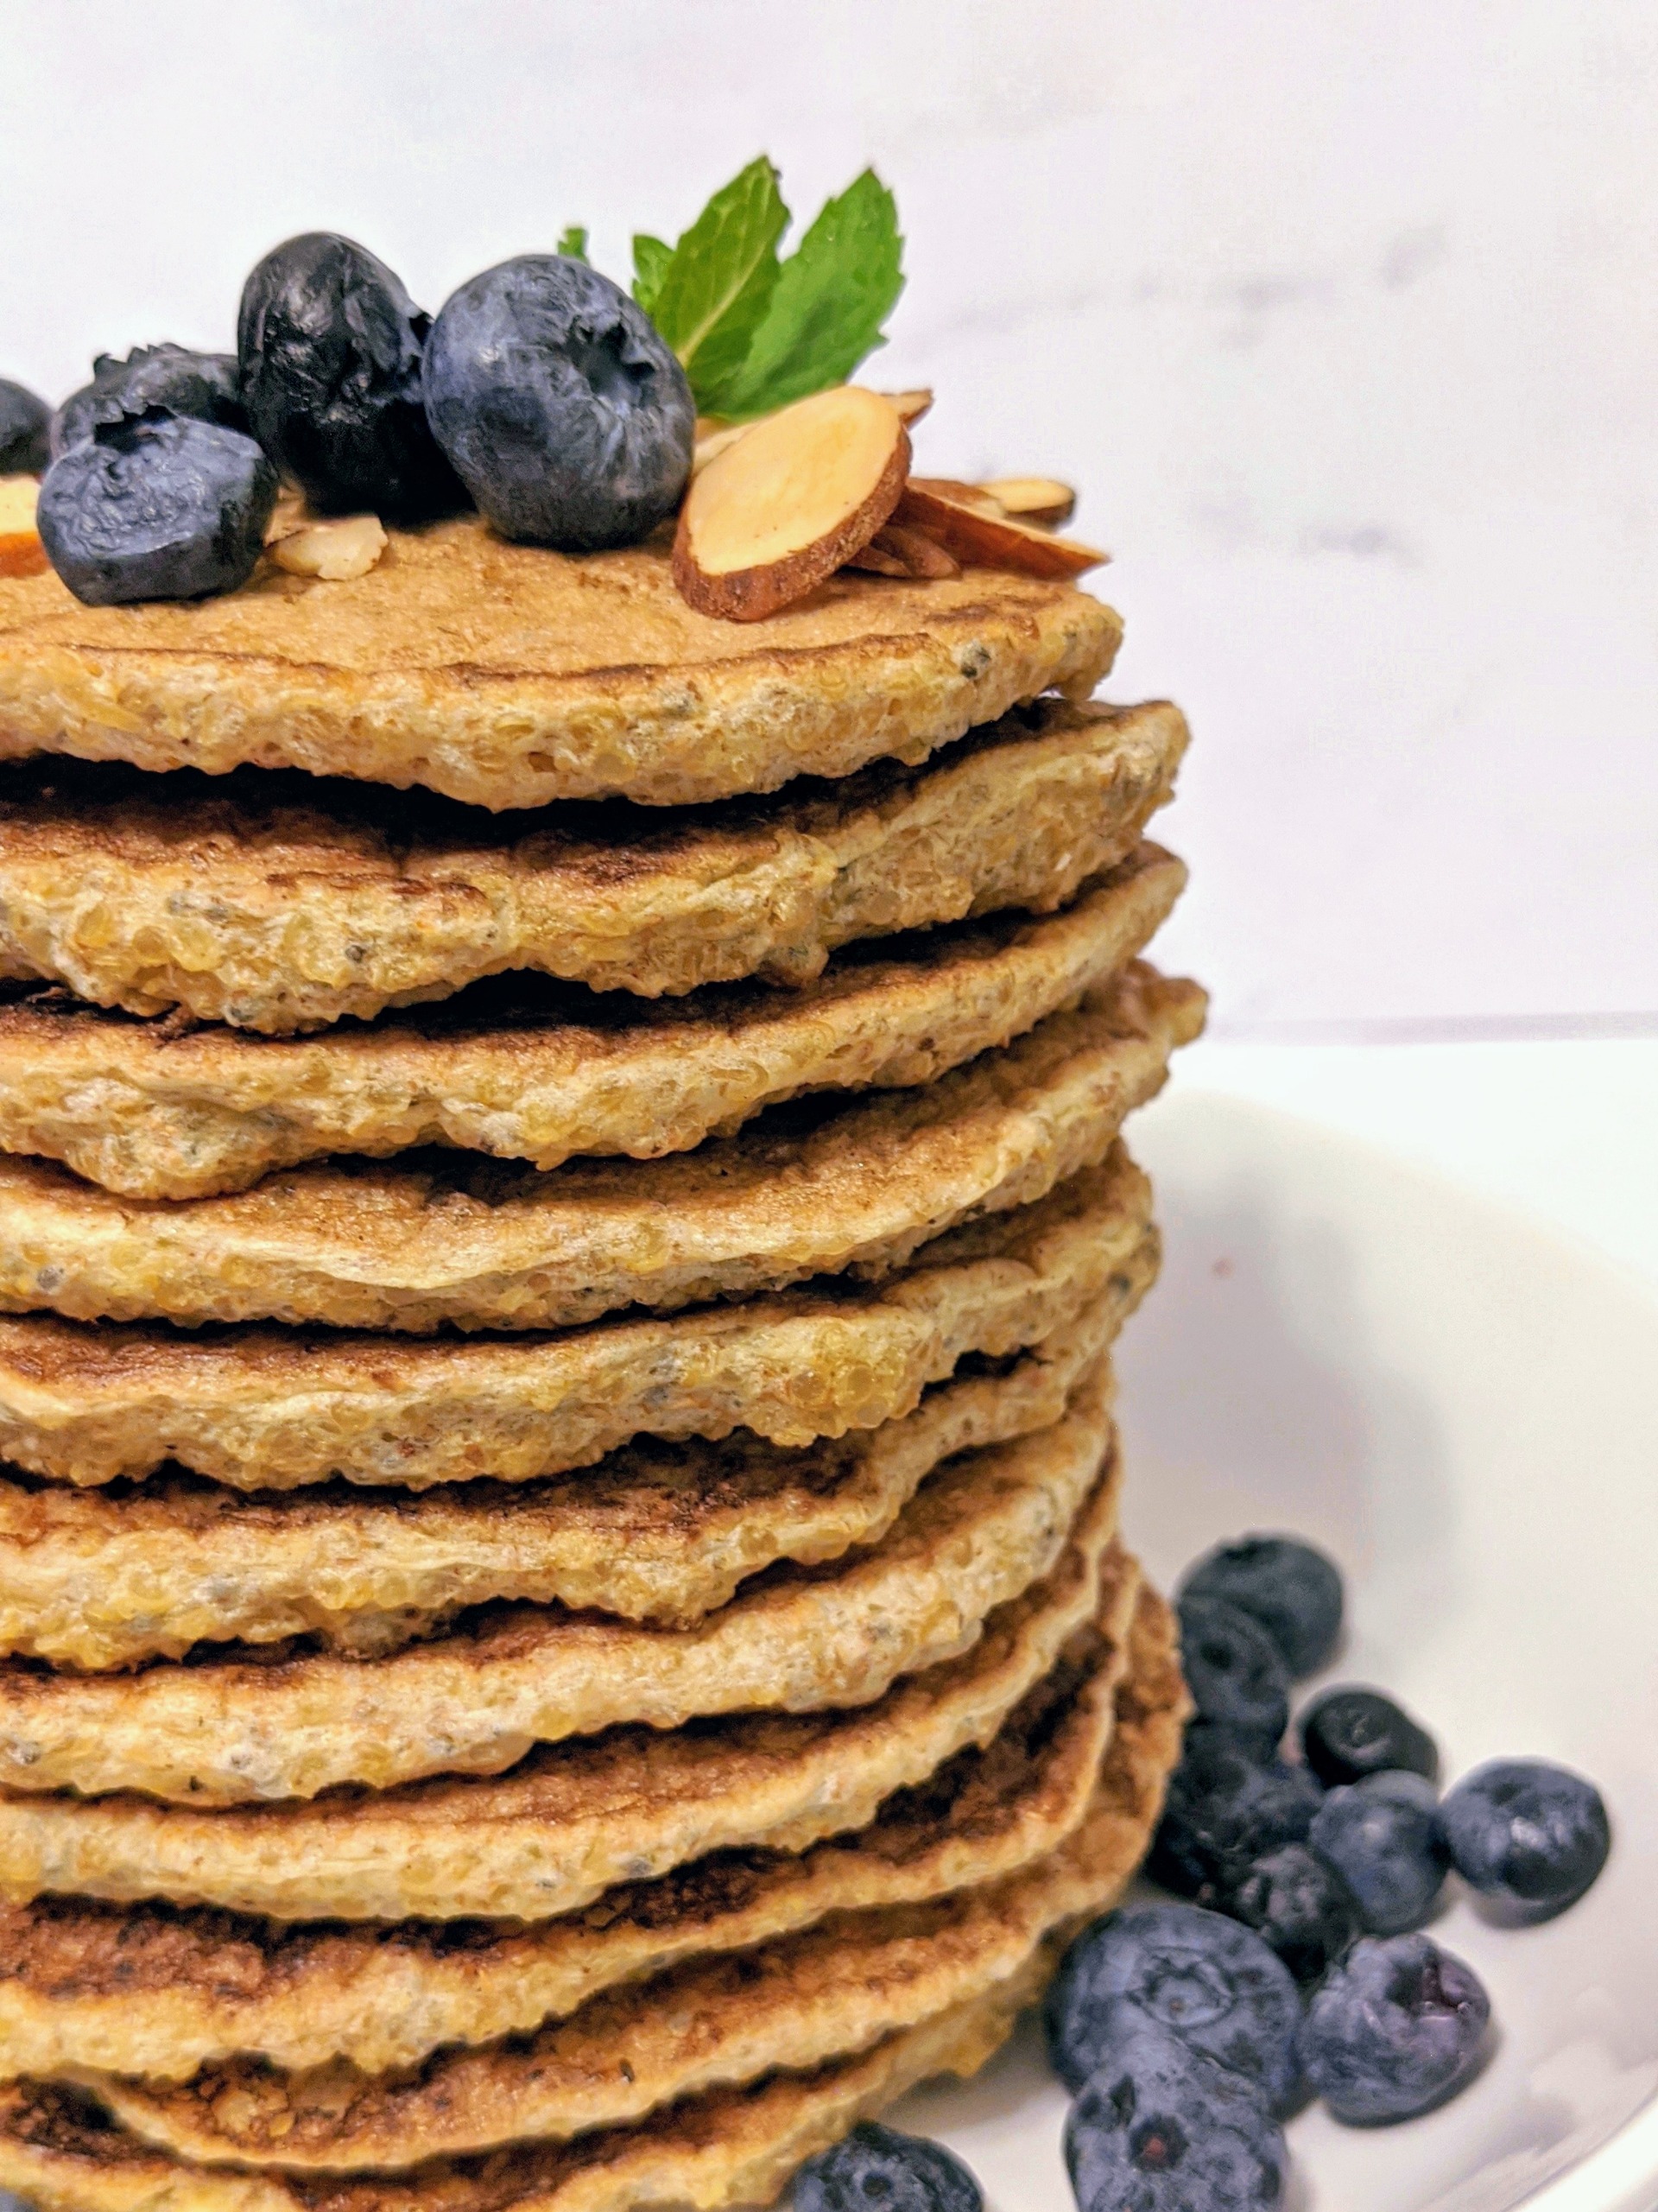 quinoa pancakes with essential proteins, fiber and whole grain. vegan option too